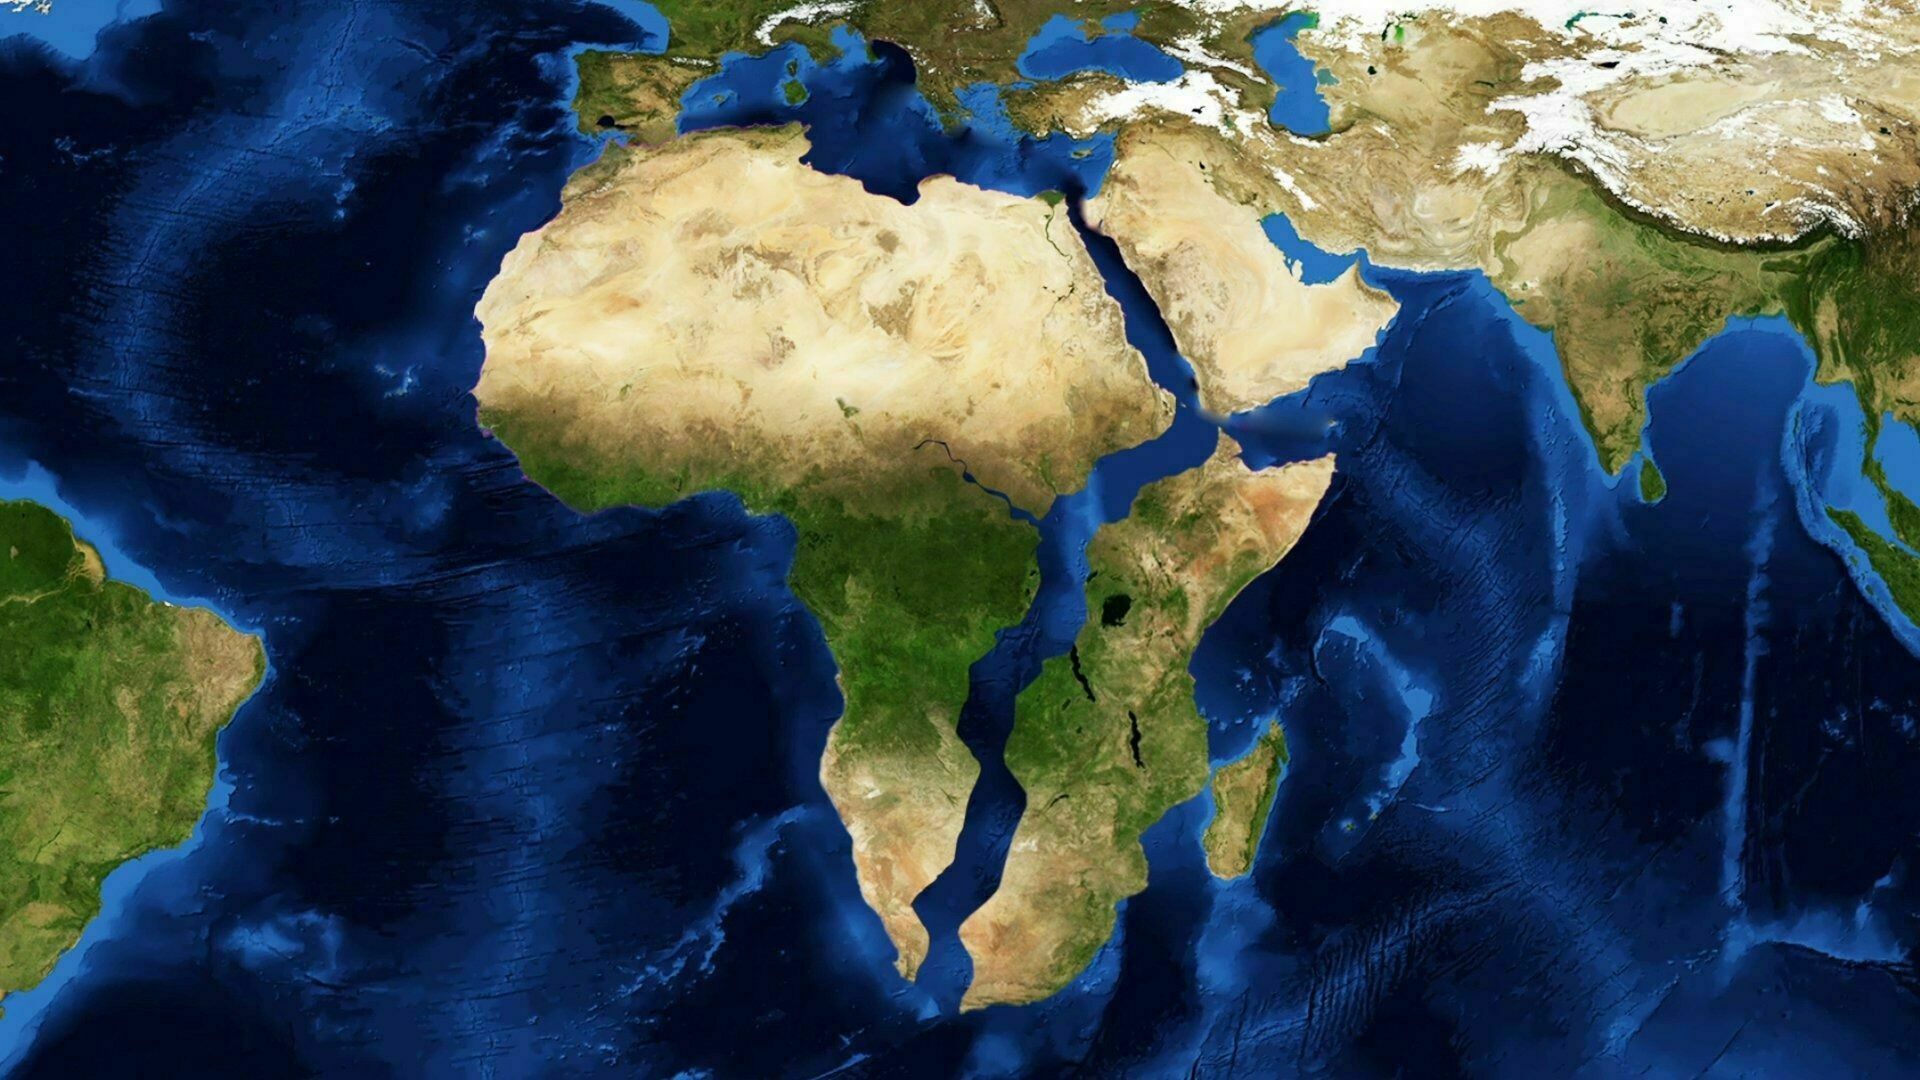 A new ocean is forming on Earth - it will divide Africa into two parts, scientists say